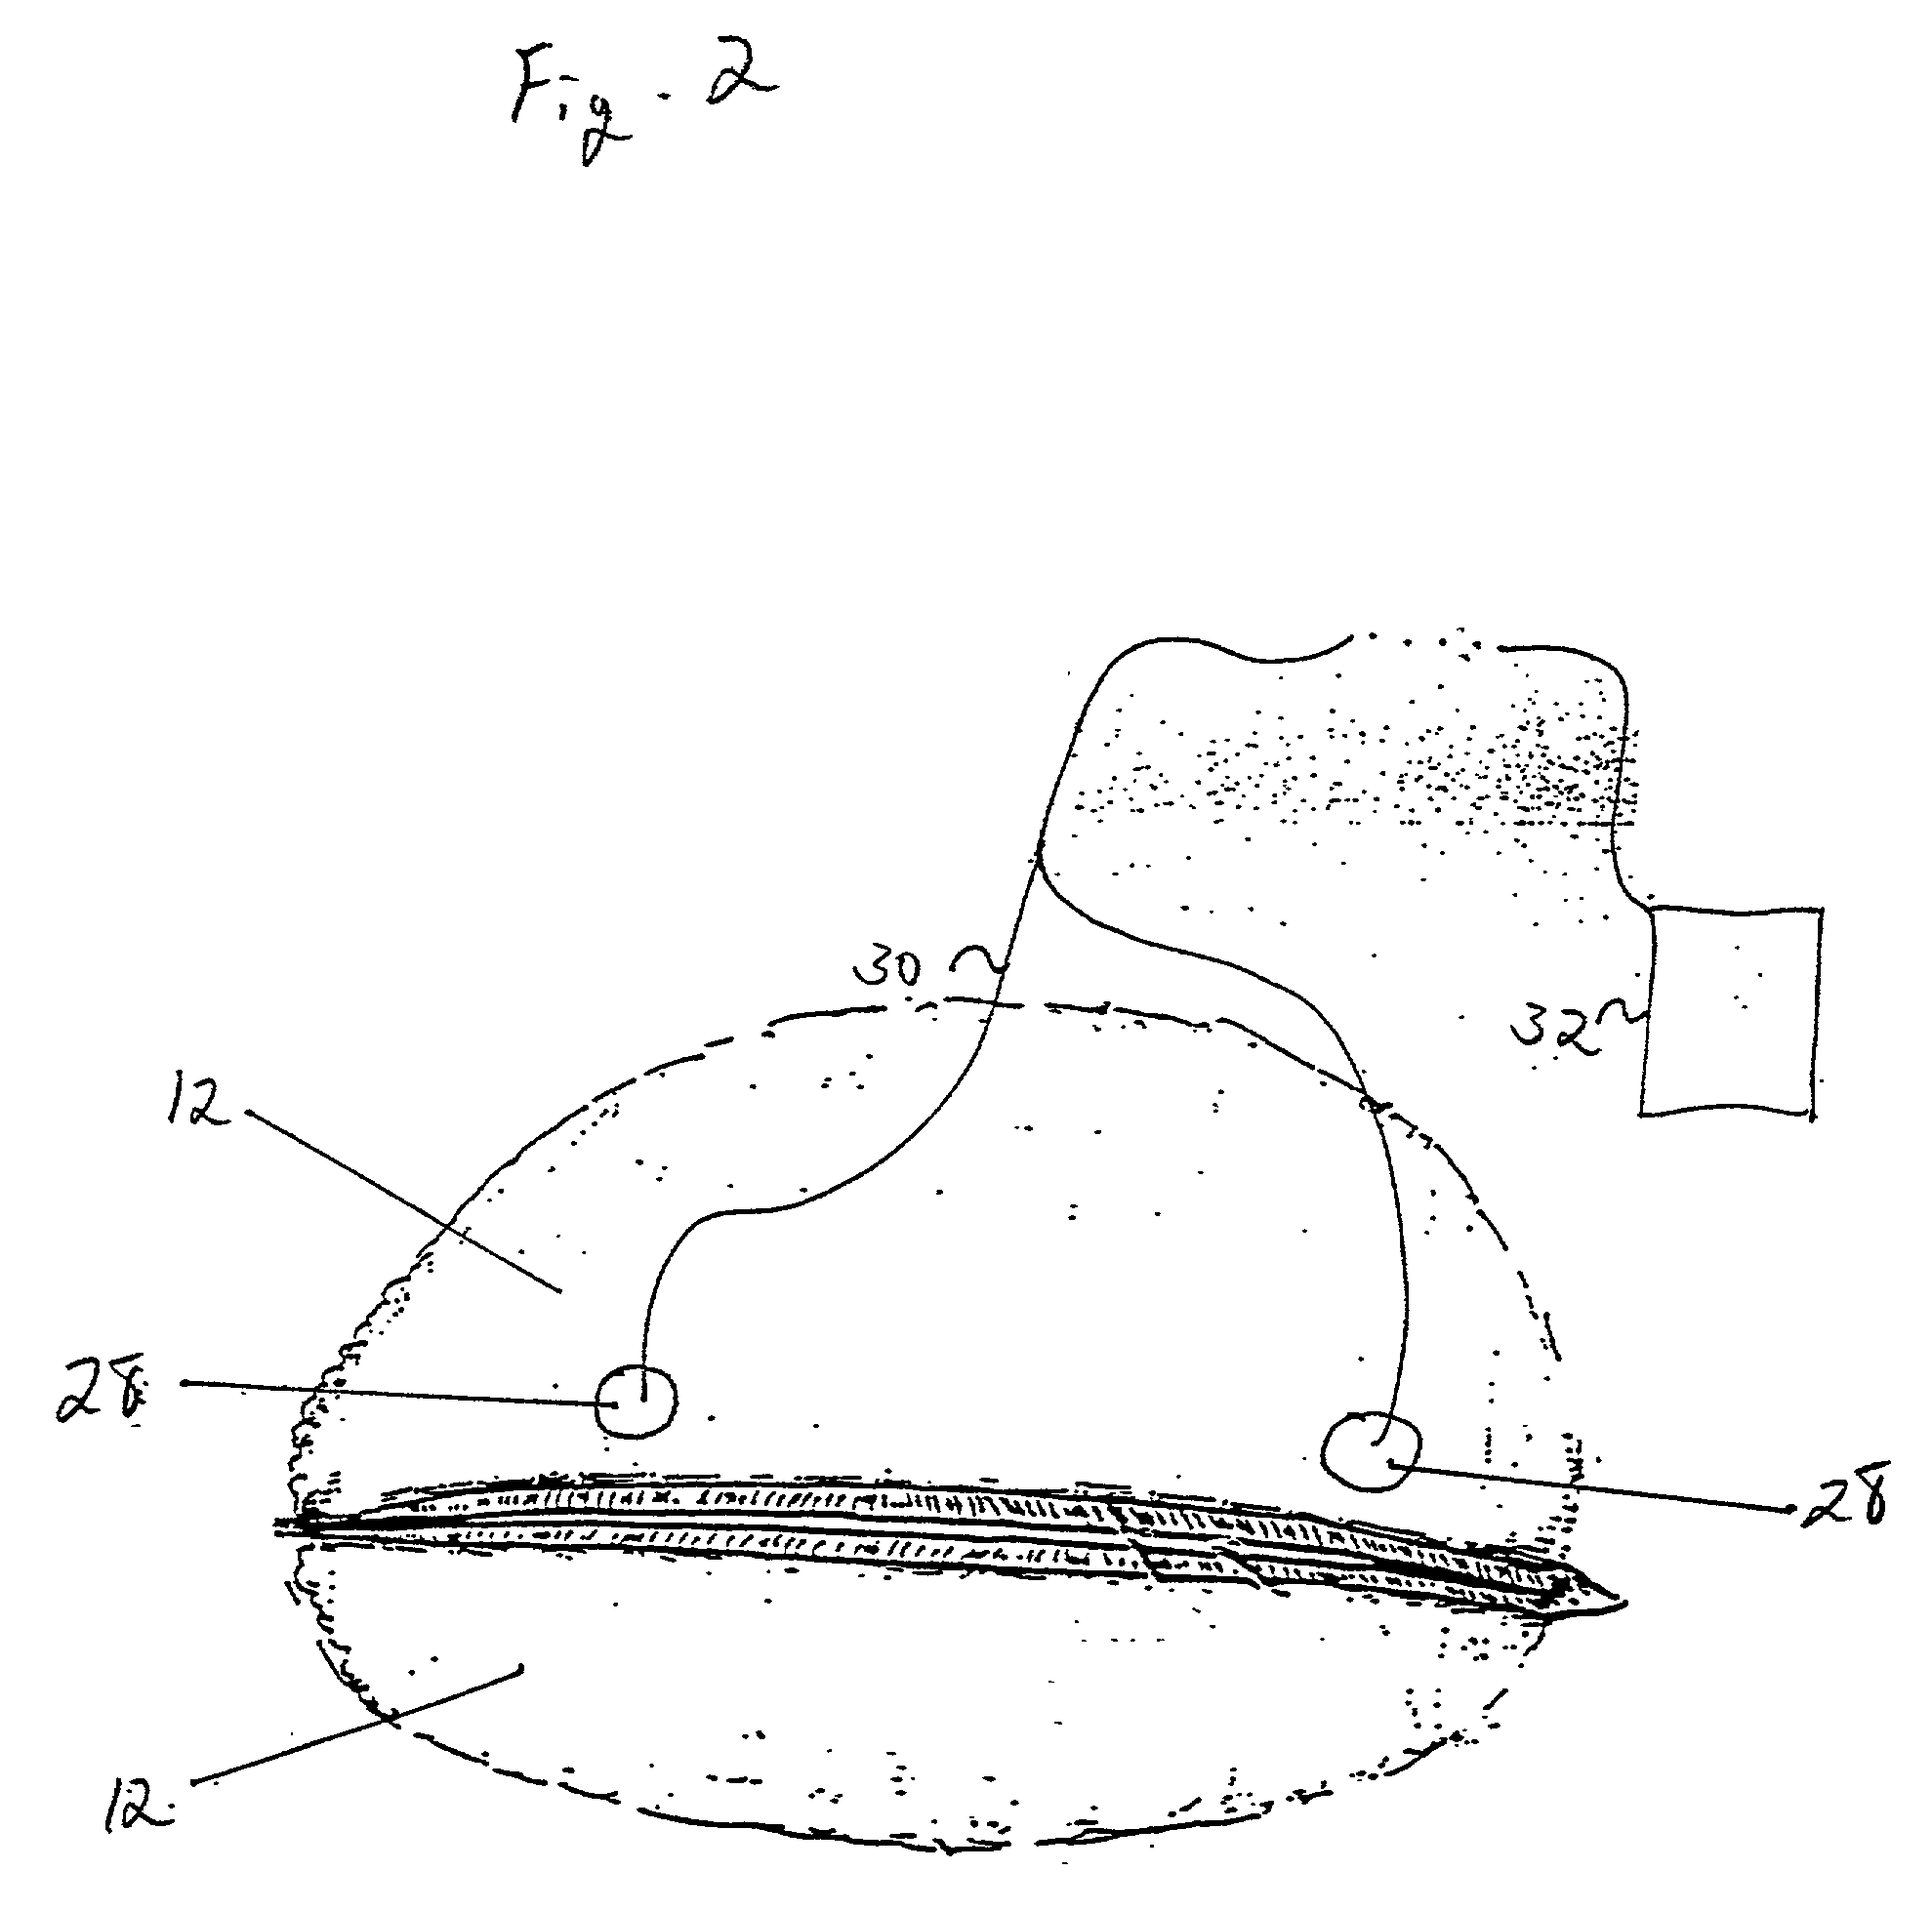 Method and apparatus for preventing and treating eyelid problems